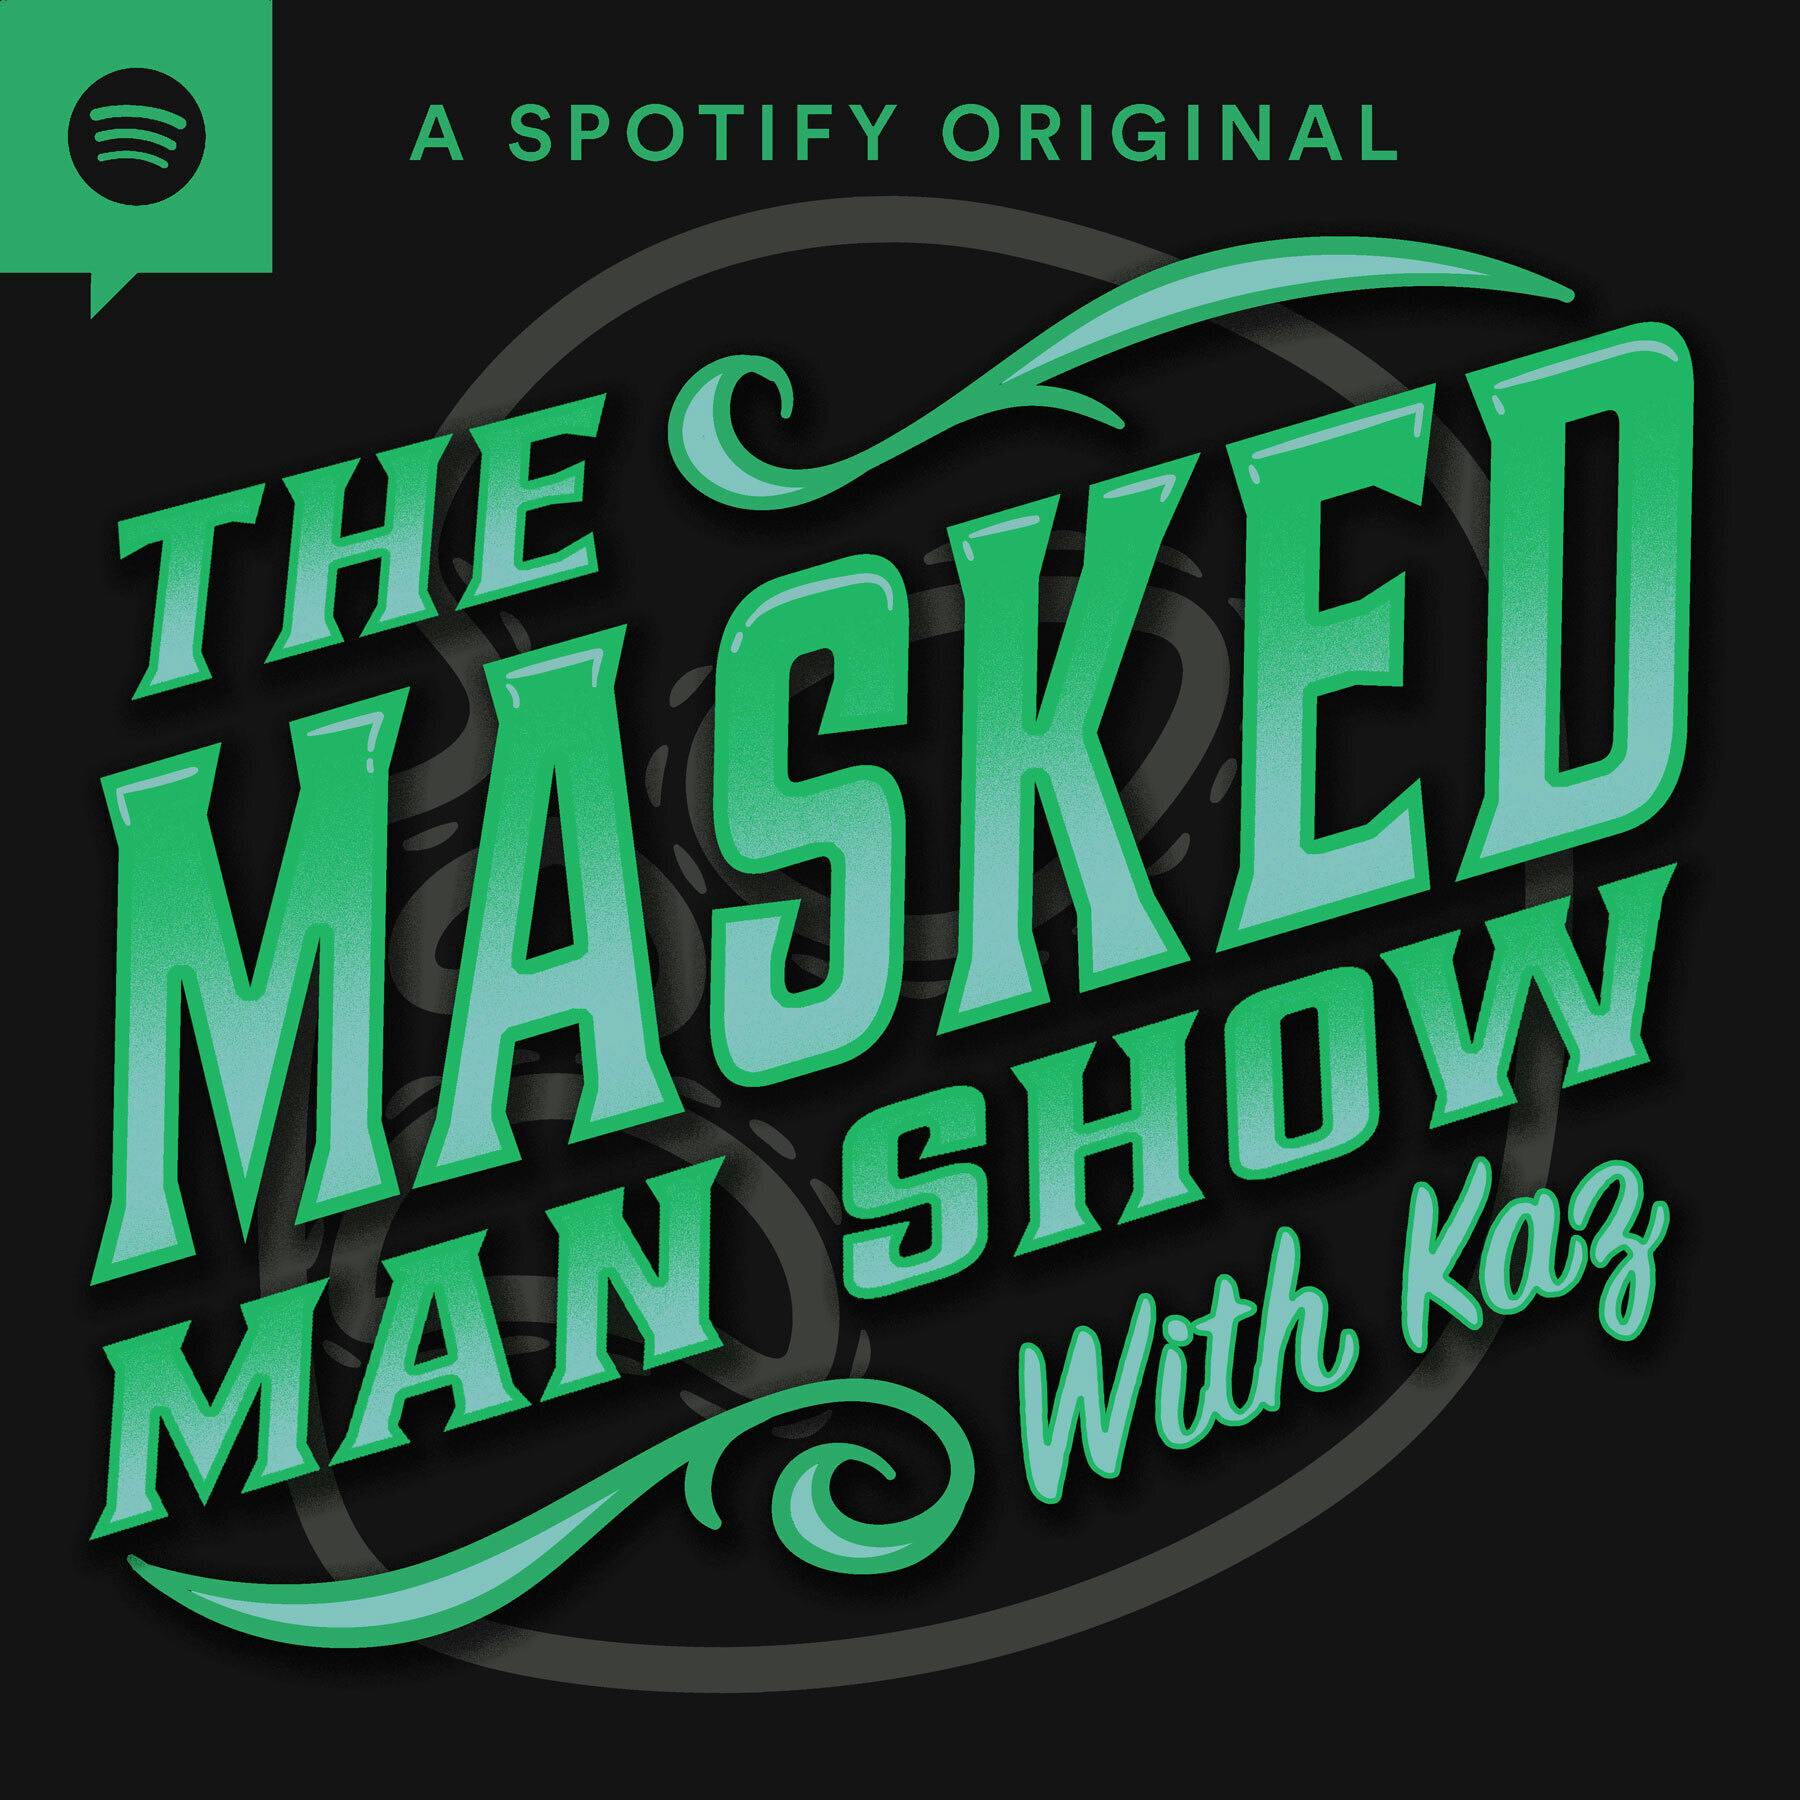 Guilty Pleasures in Pro Wrestling? Mailbag Episode of ’The Masked Man Show.’